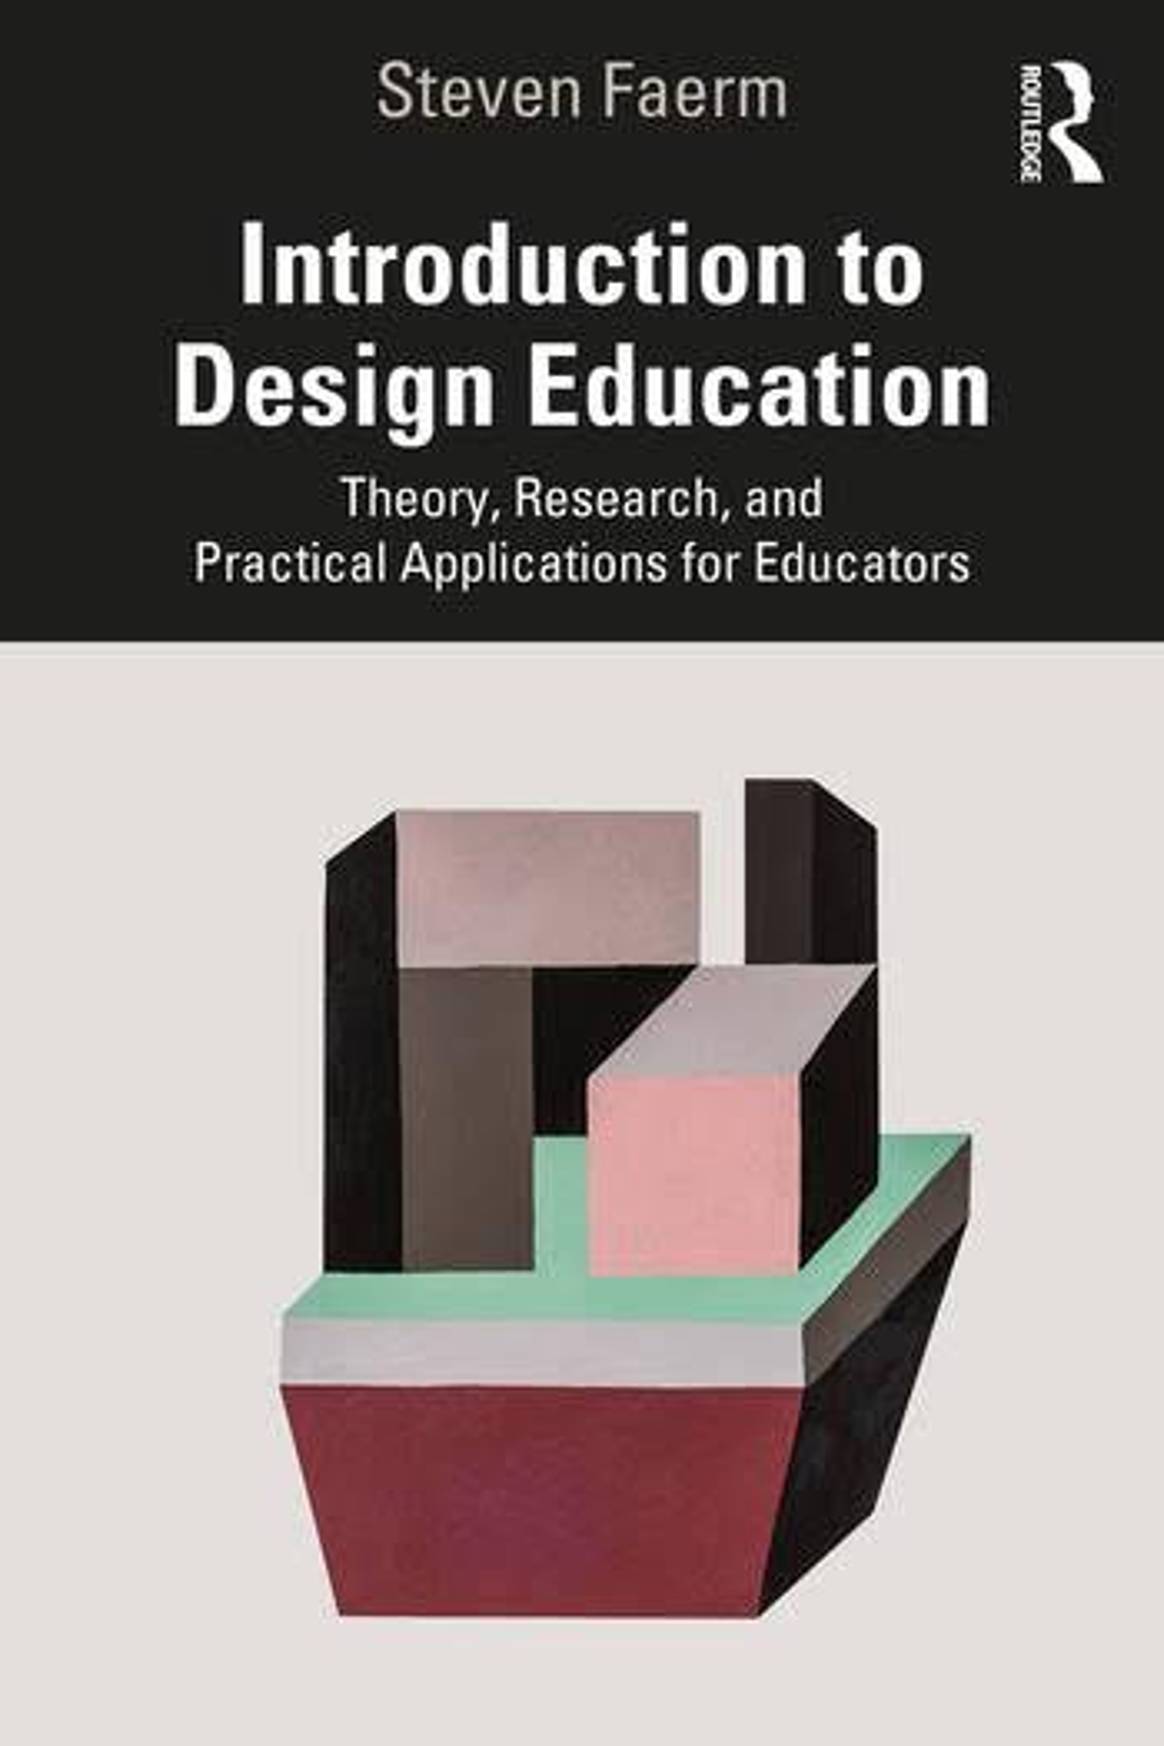 Introduction to Design Education: Theory, Research and Practical Applications for Educators is Steven Faerm's third book